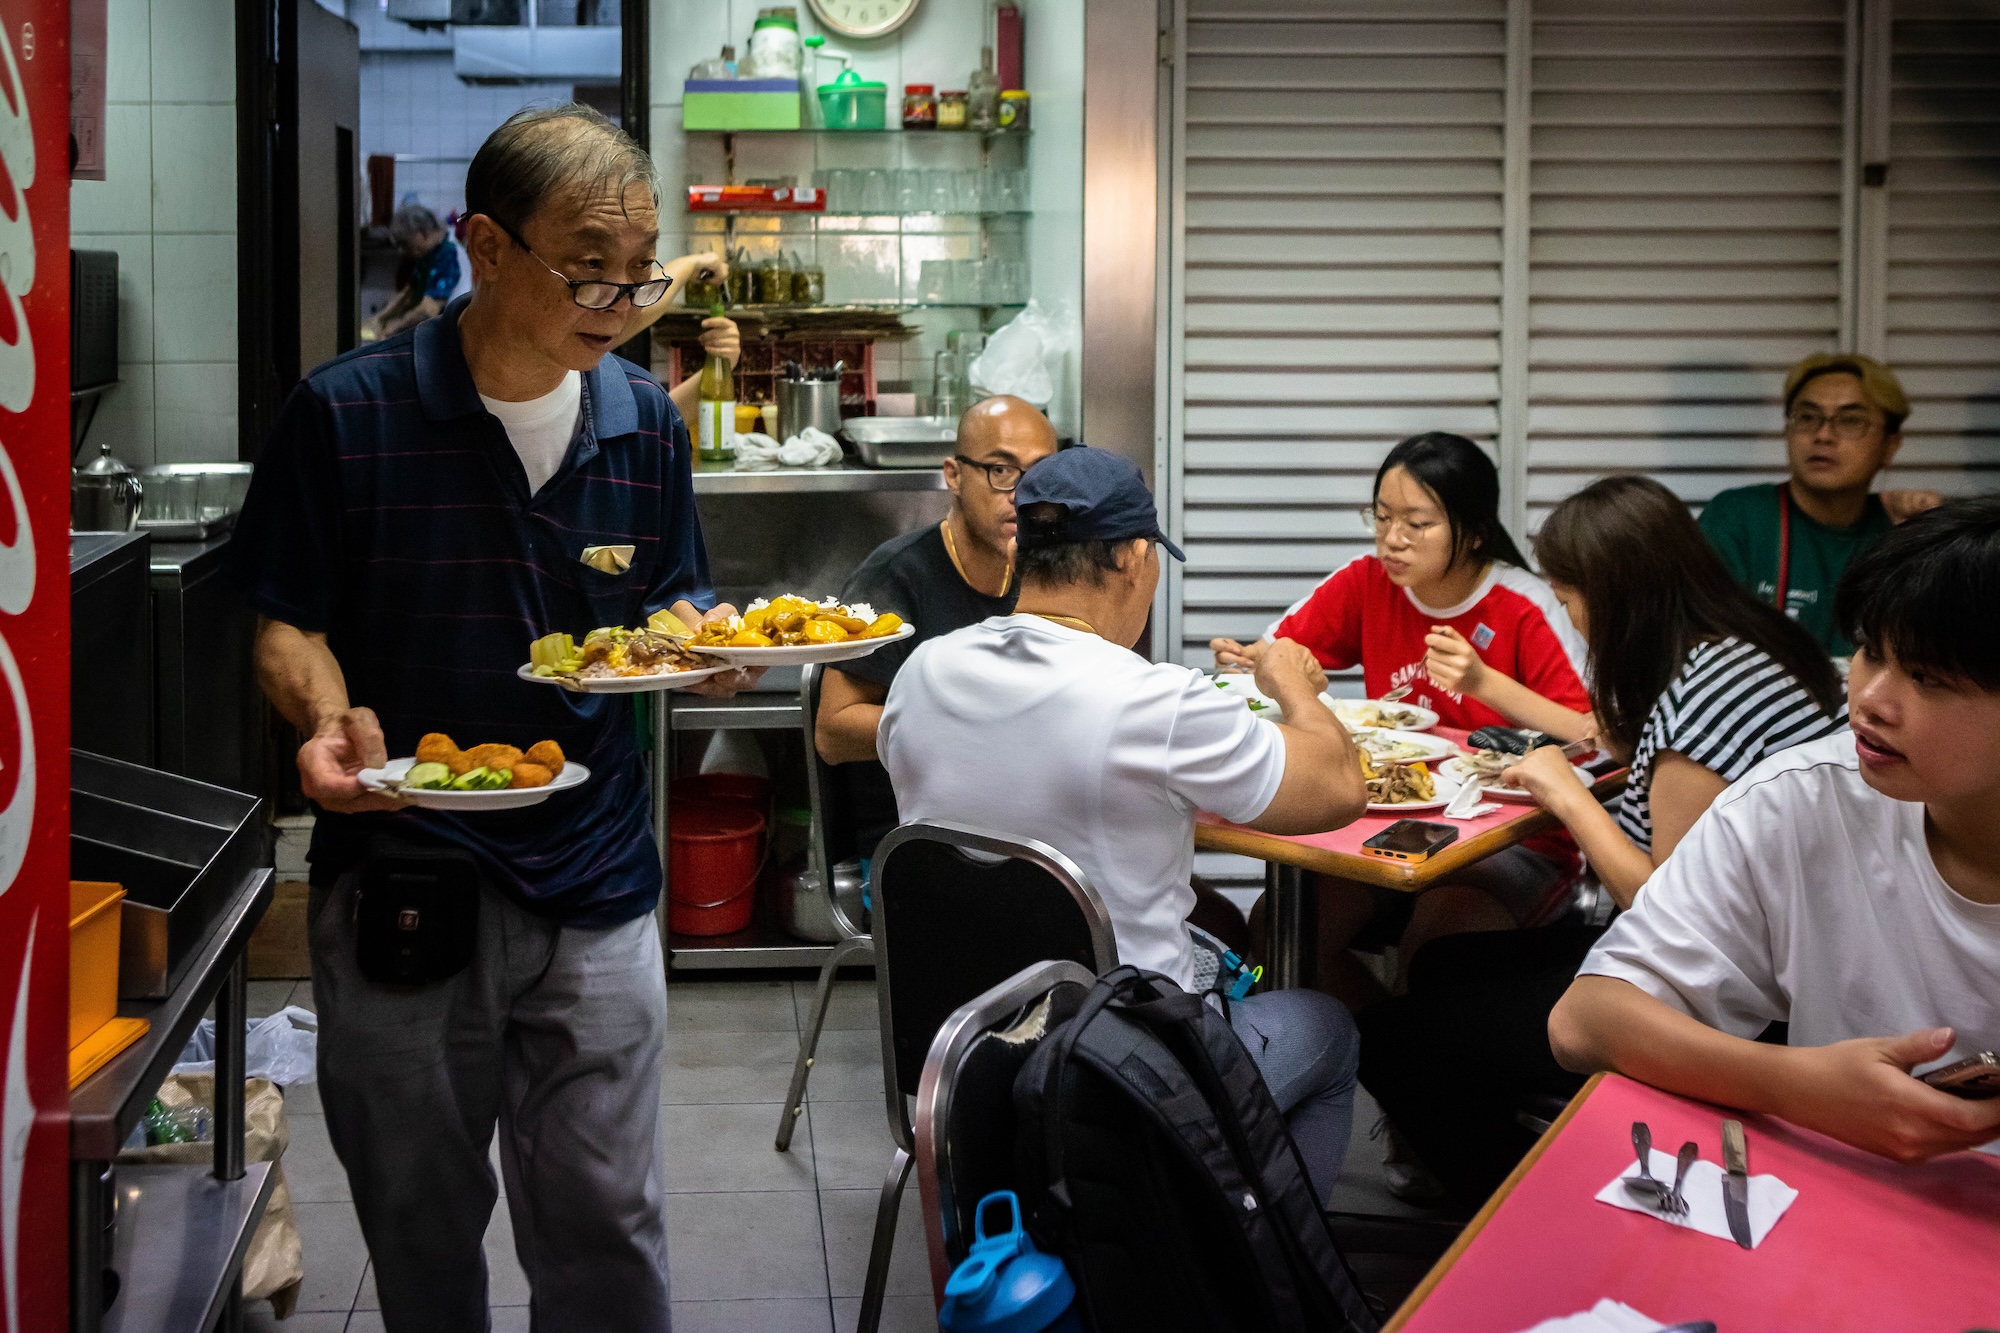 His retirement just hours away, Lam Kok Lon waits tables one more time